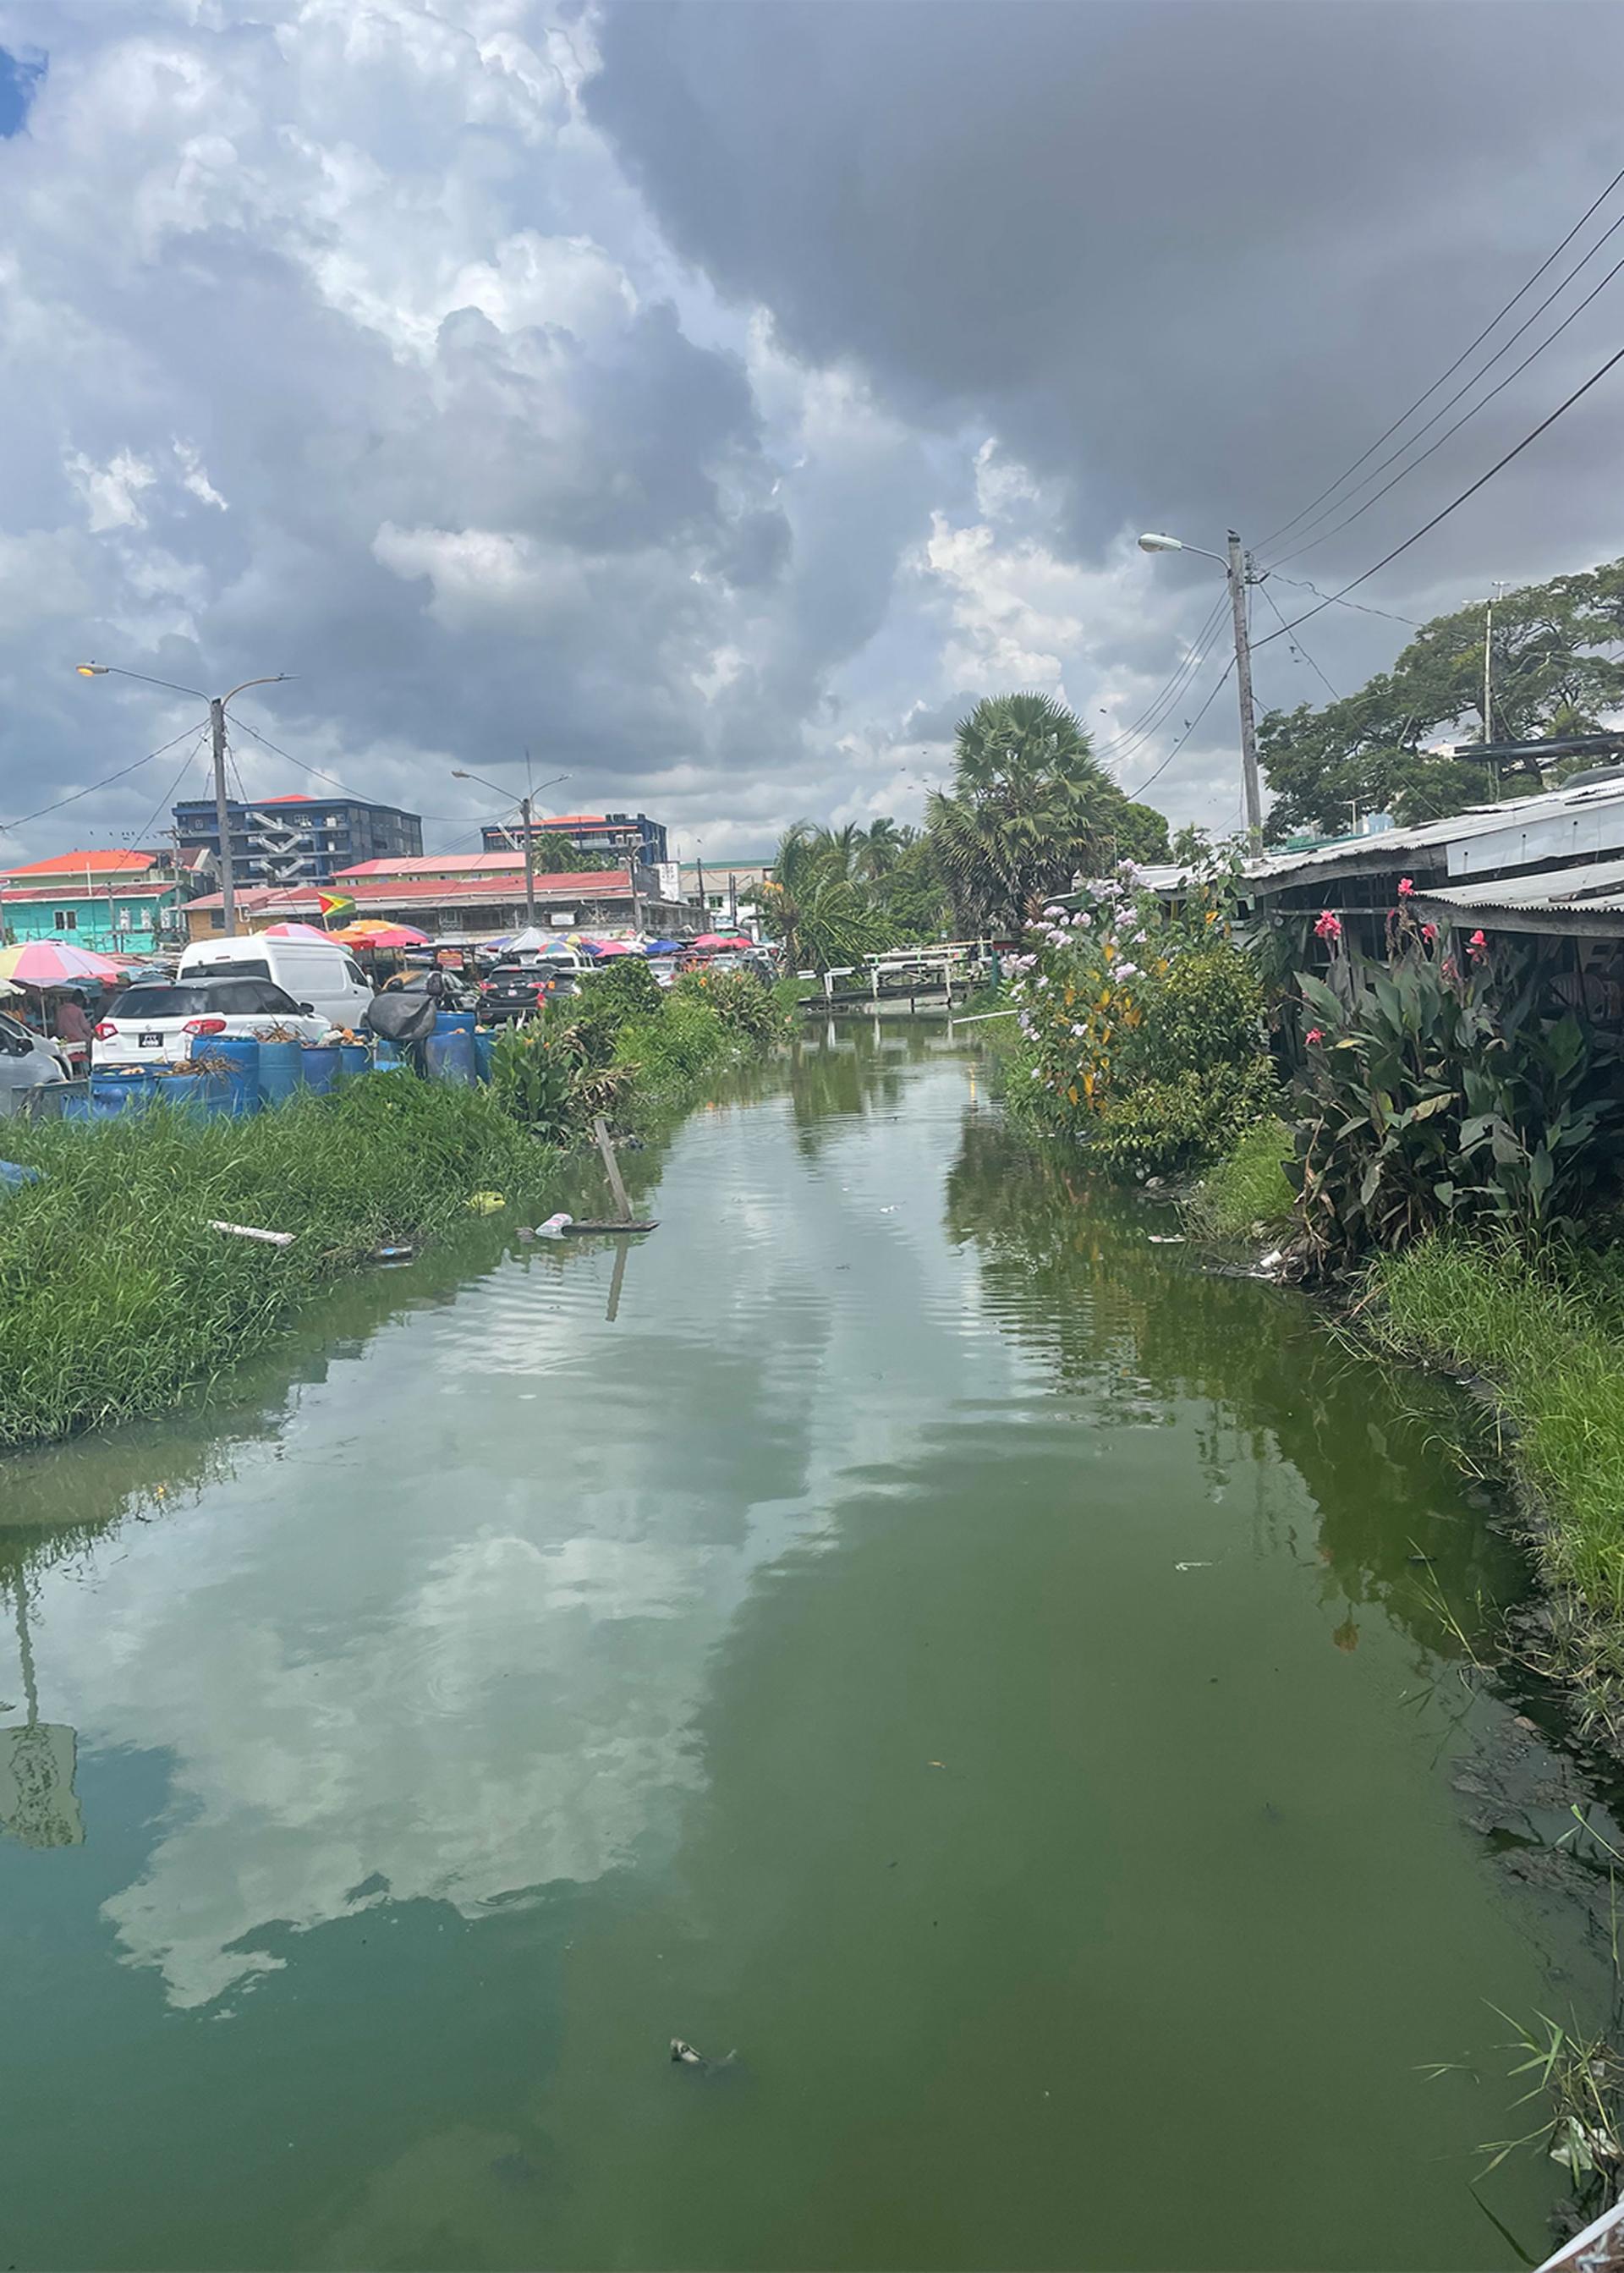 A canal in Georgetown, Guyana.